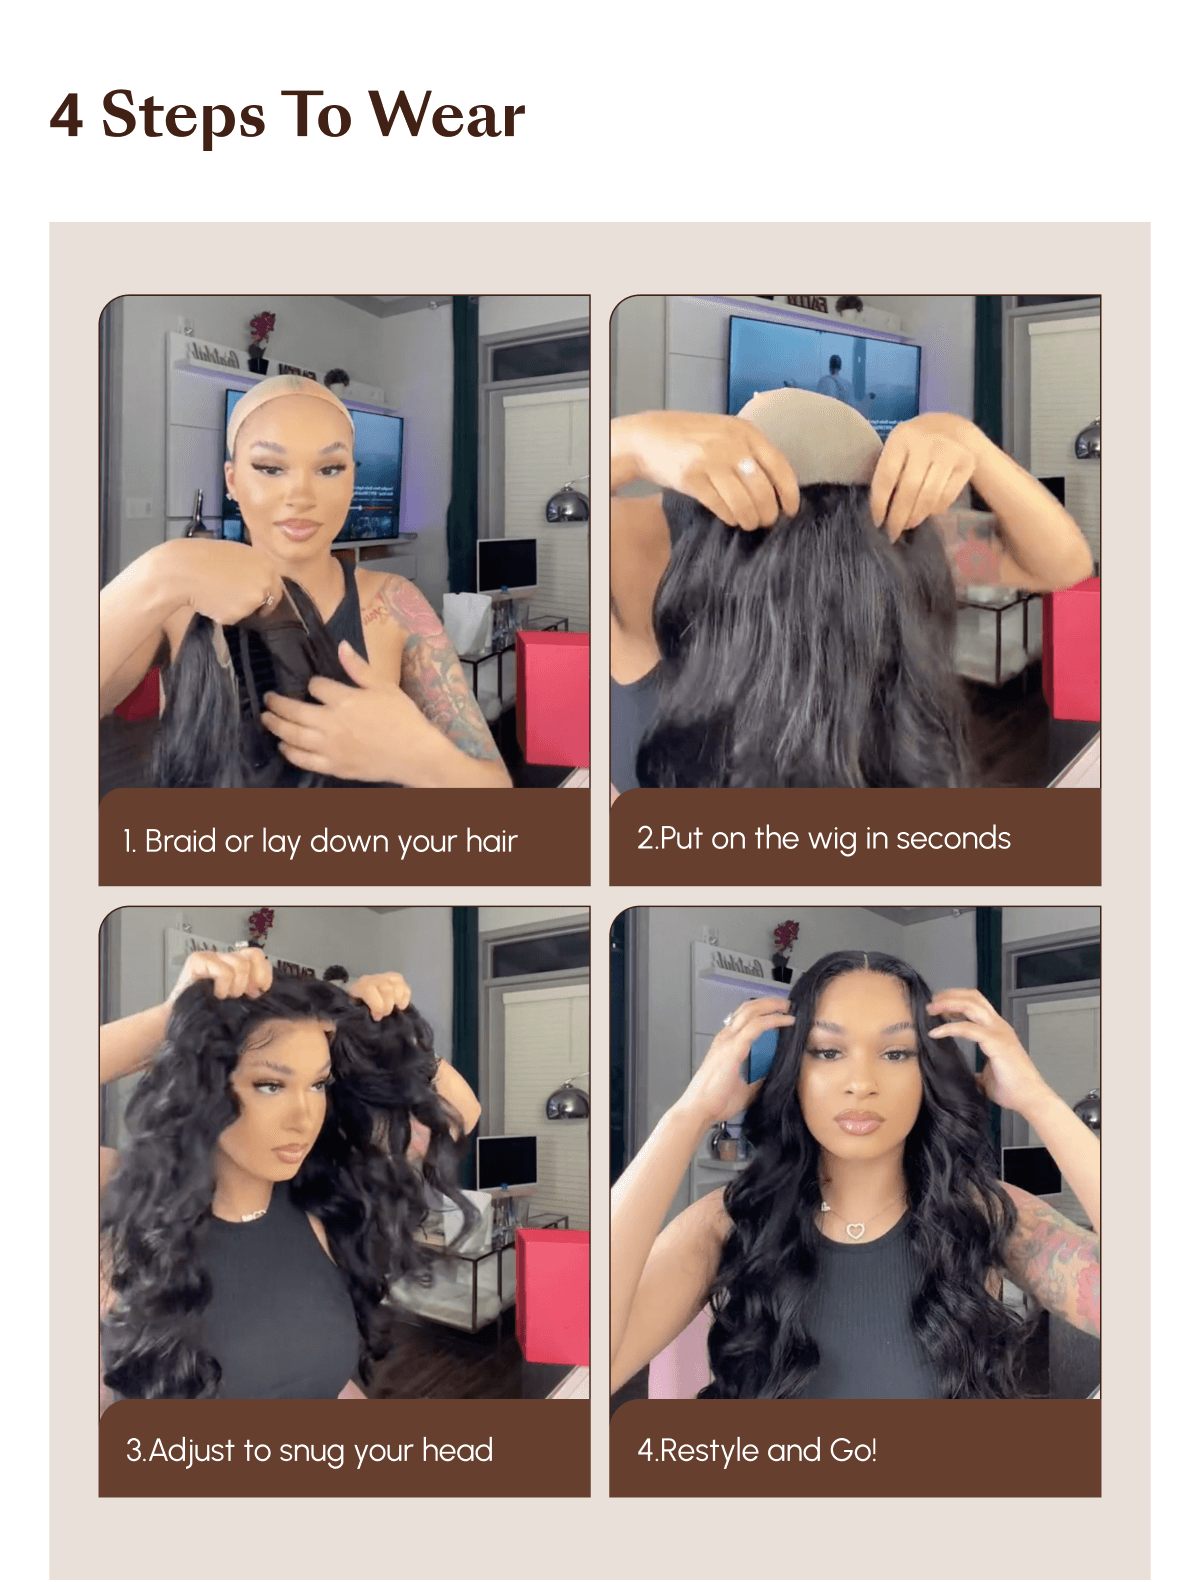 11 WAYS TO STYLE A LACE CLOSURE WIG!!! FT. UNICE HAIR, Lolo & Free Team